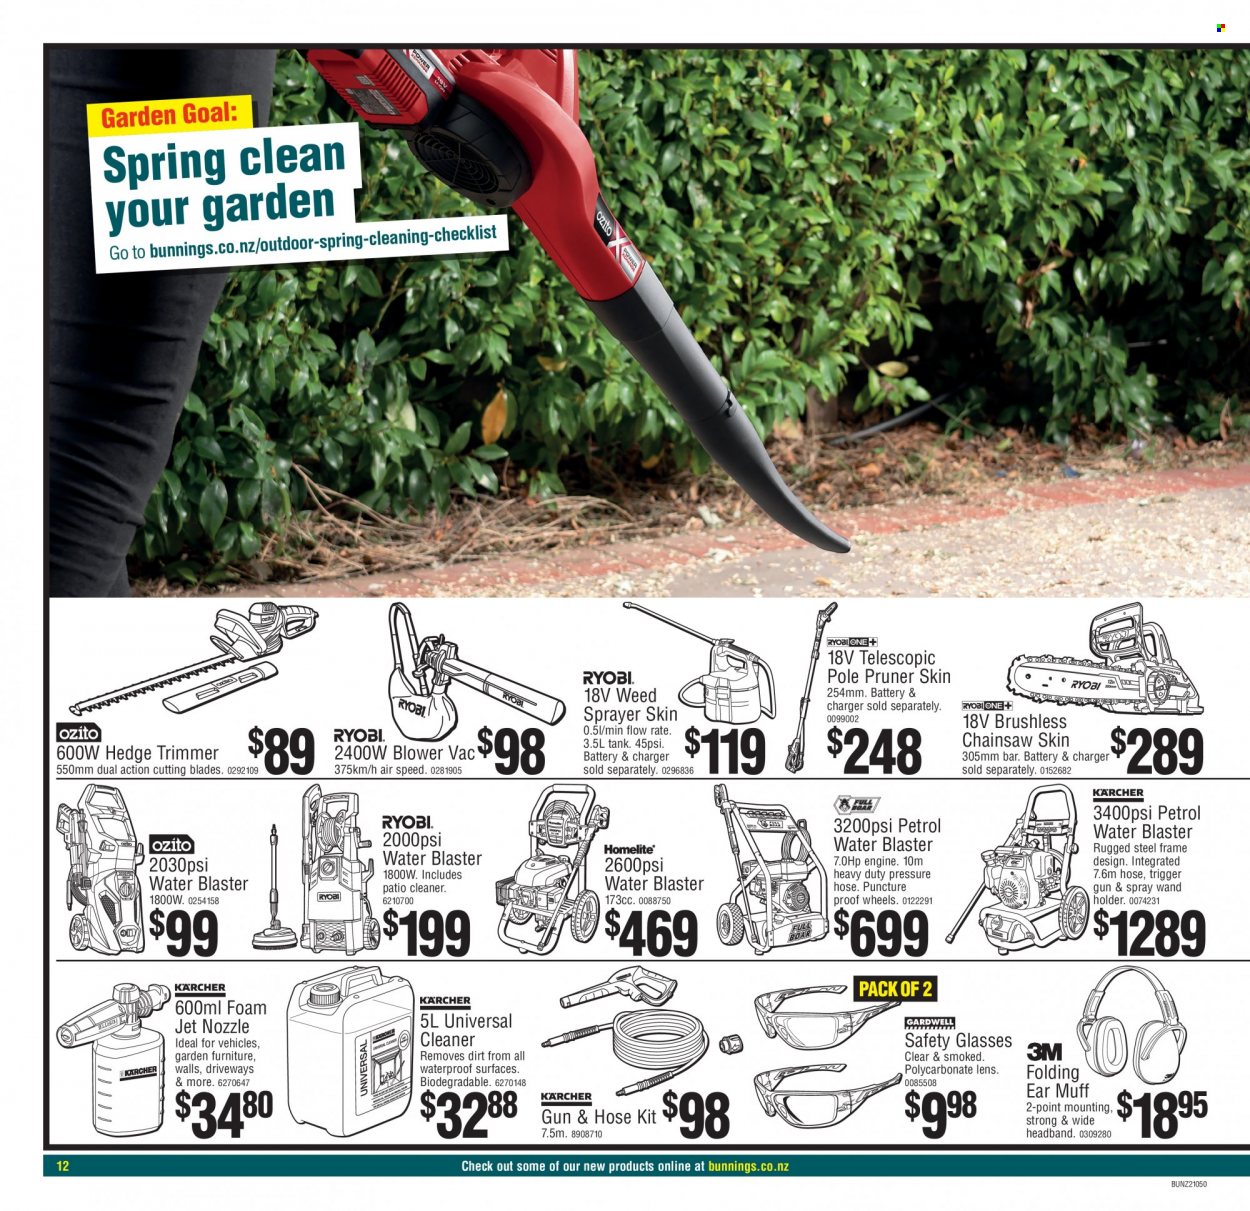 Bunnings Warehouse mailer . Page 12.